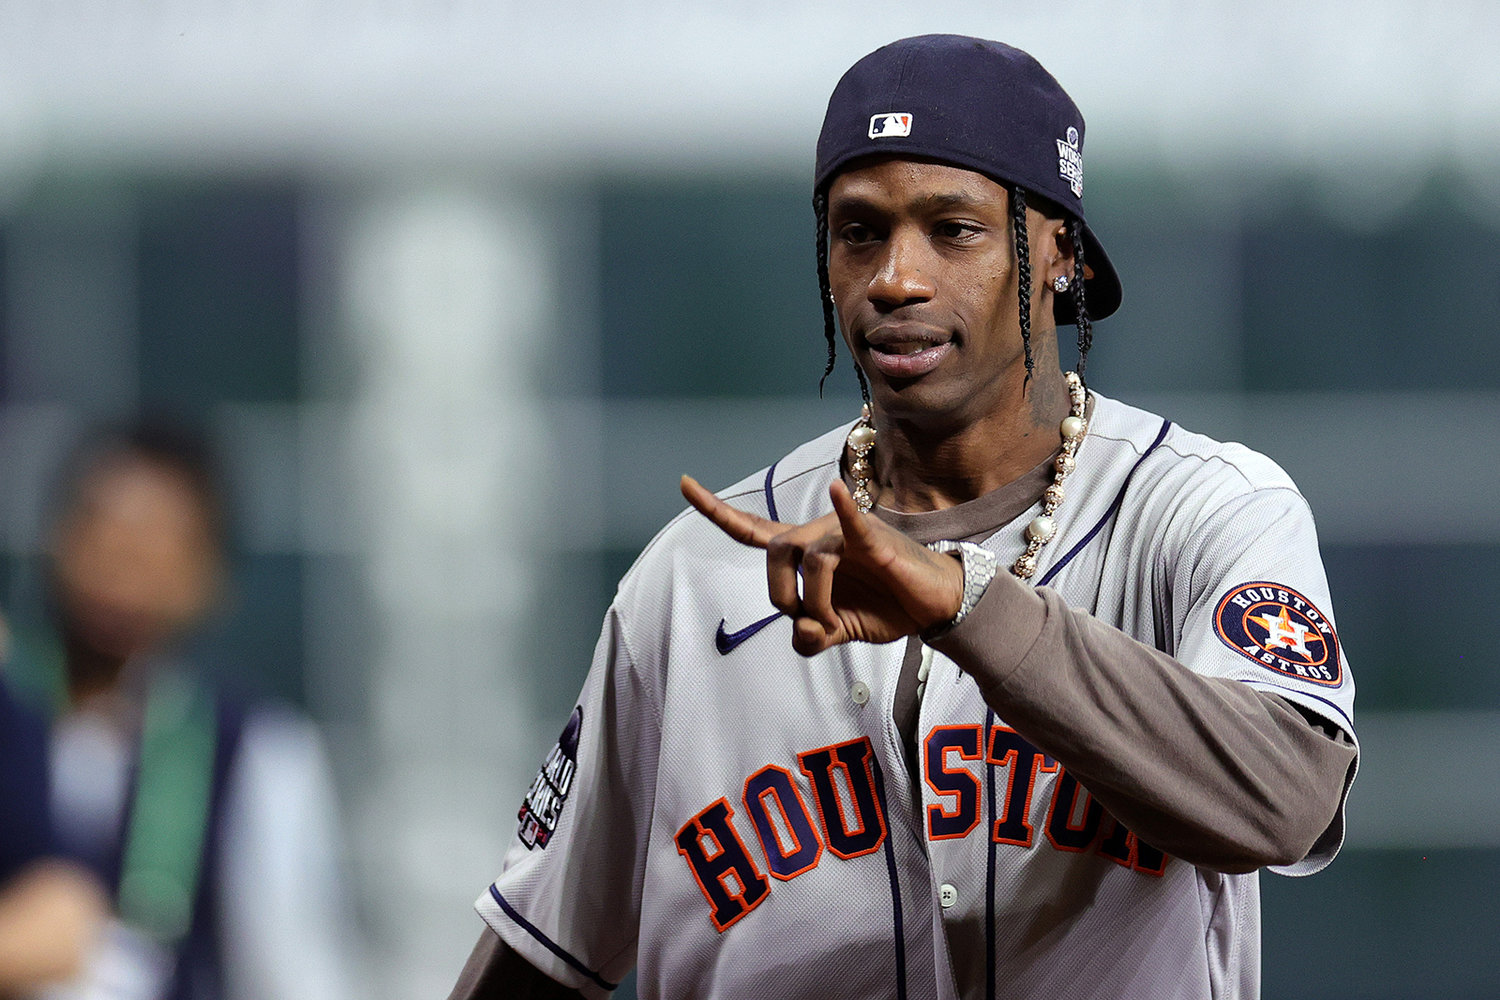 Rapper Travis Scott announces "play ball" prior to Game 6 of the World Series between the Houston Astros and the Atlanta Braves at Minute Maid Park on Nov. 2, 2021, in Houston. (Carmen Mandato/Getty Images/TNS)